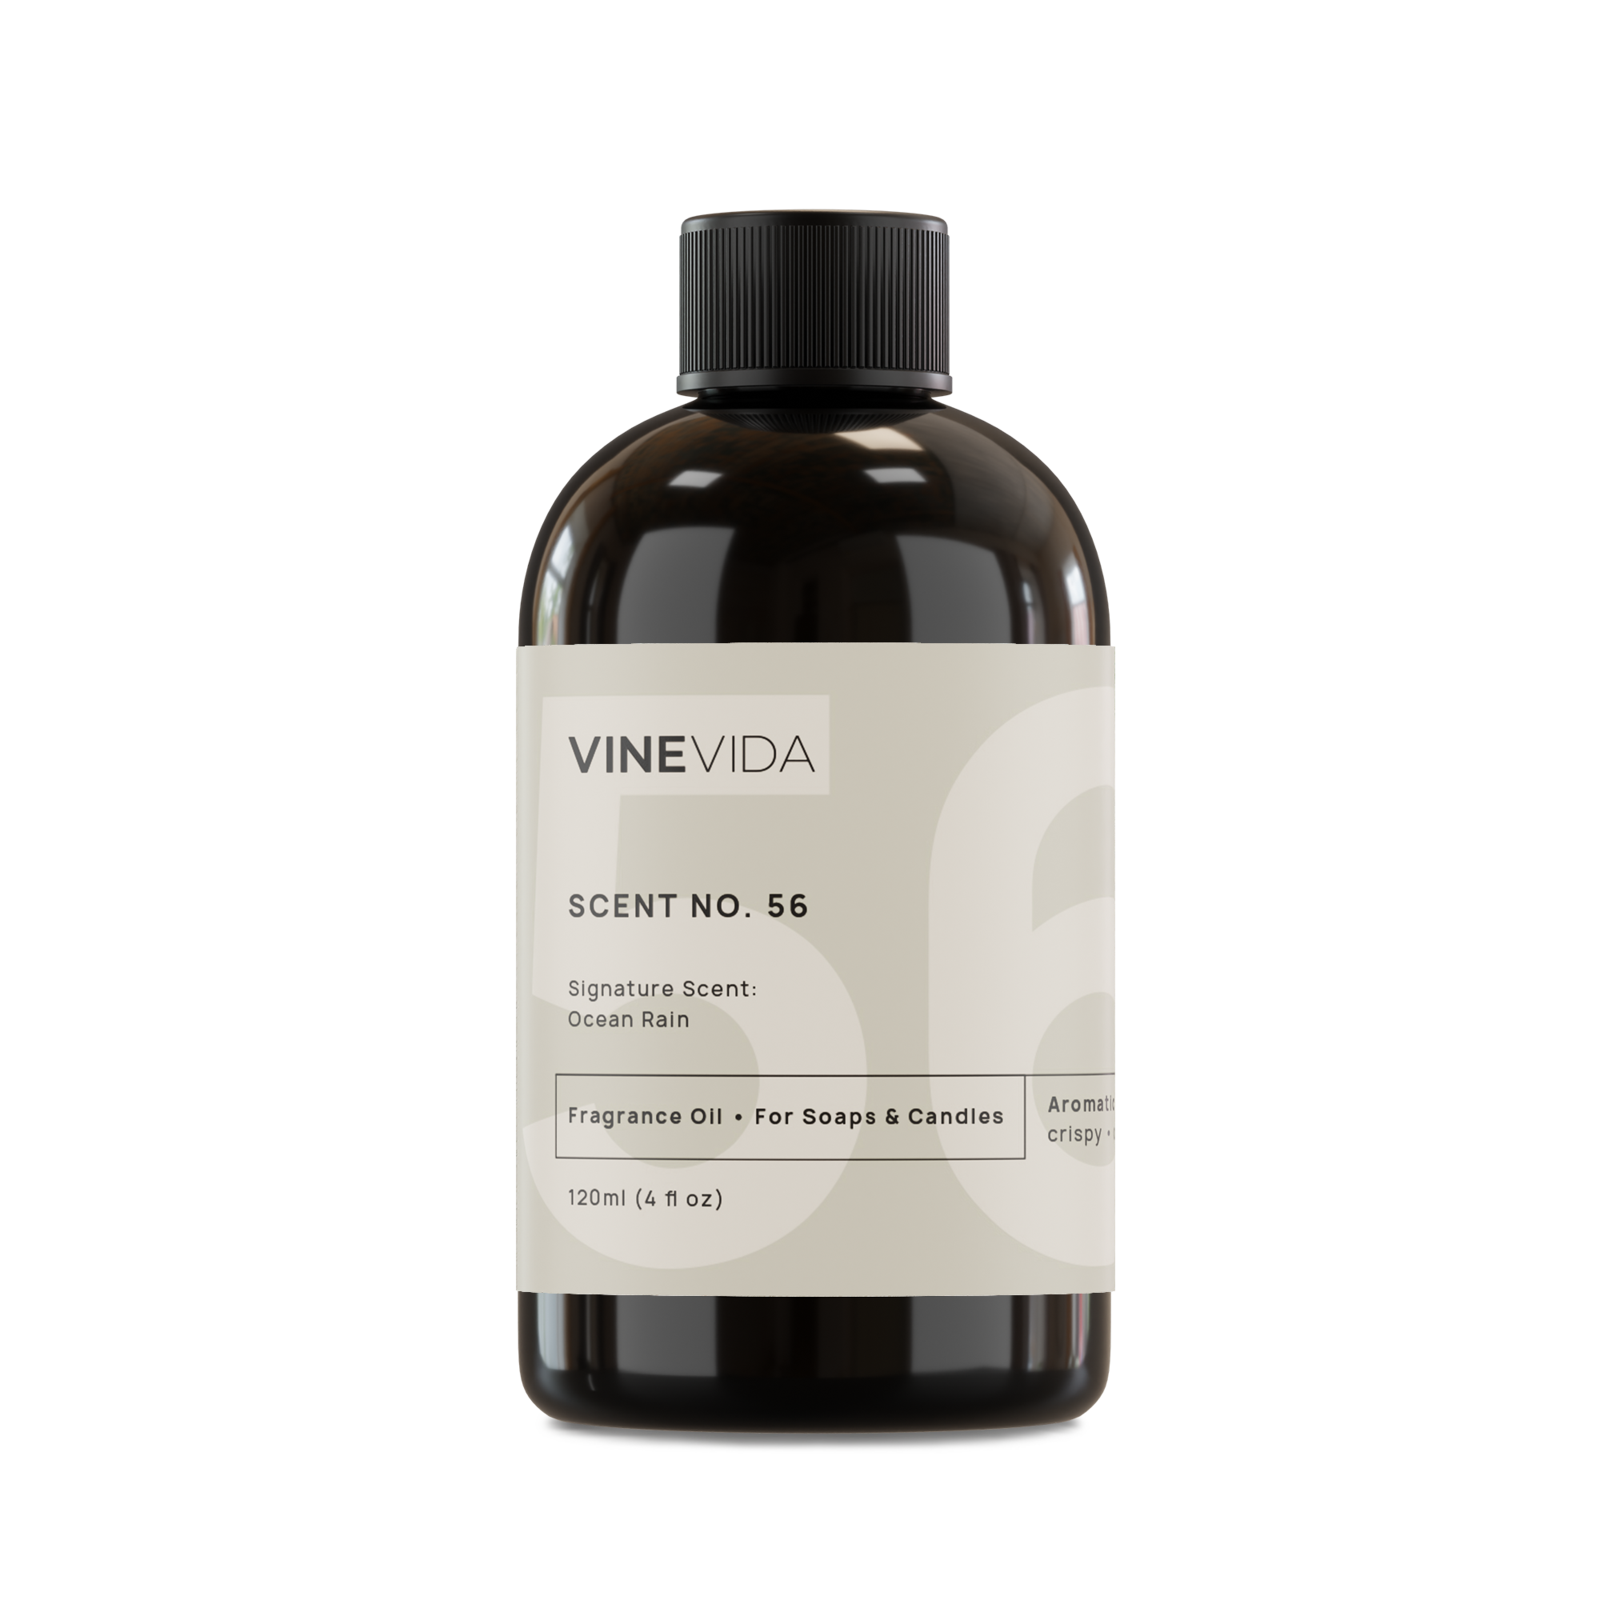  VINEVIDA [16oz] Spa Retreat Fragrance Oil for Soap Making  Scents for Candle Making, Perfume Oils, Soy Candles, Home Scents Oil  Diffusers, Bath Scent Bomb Oils, Linen Spray, Lotions, Car Freshies 